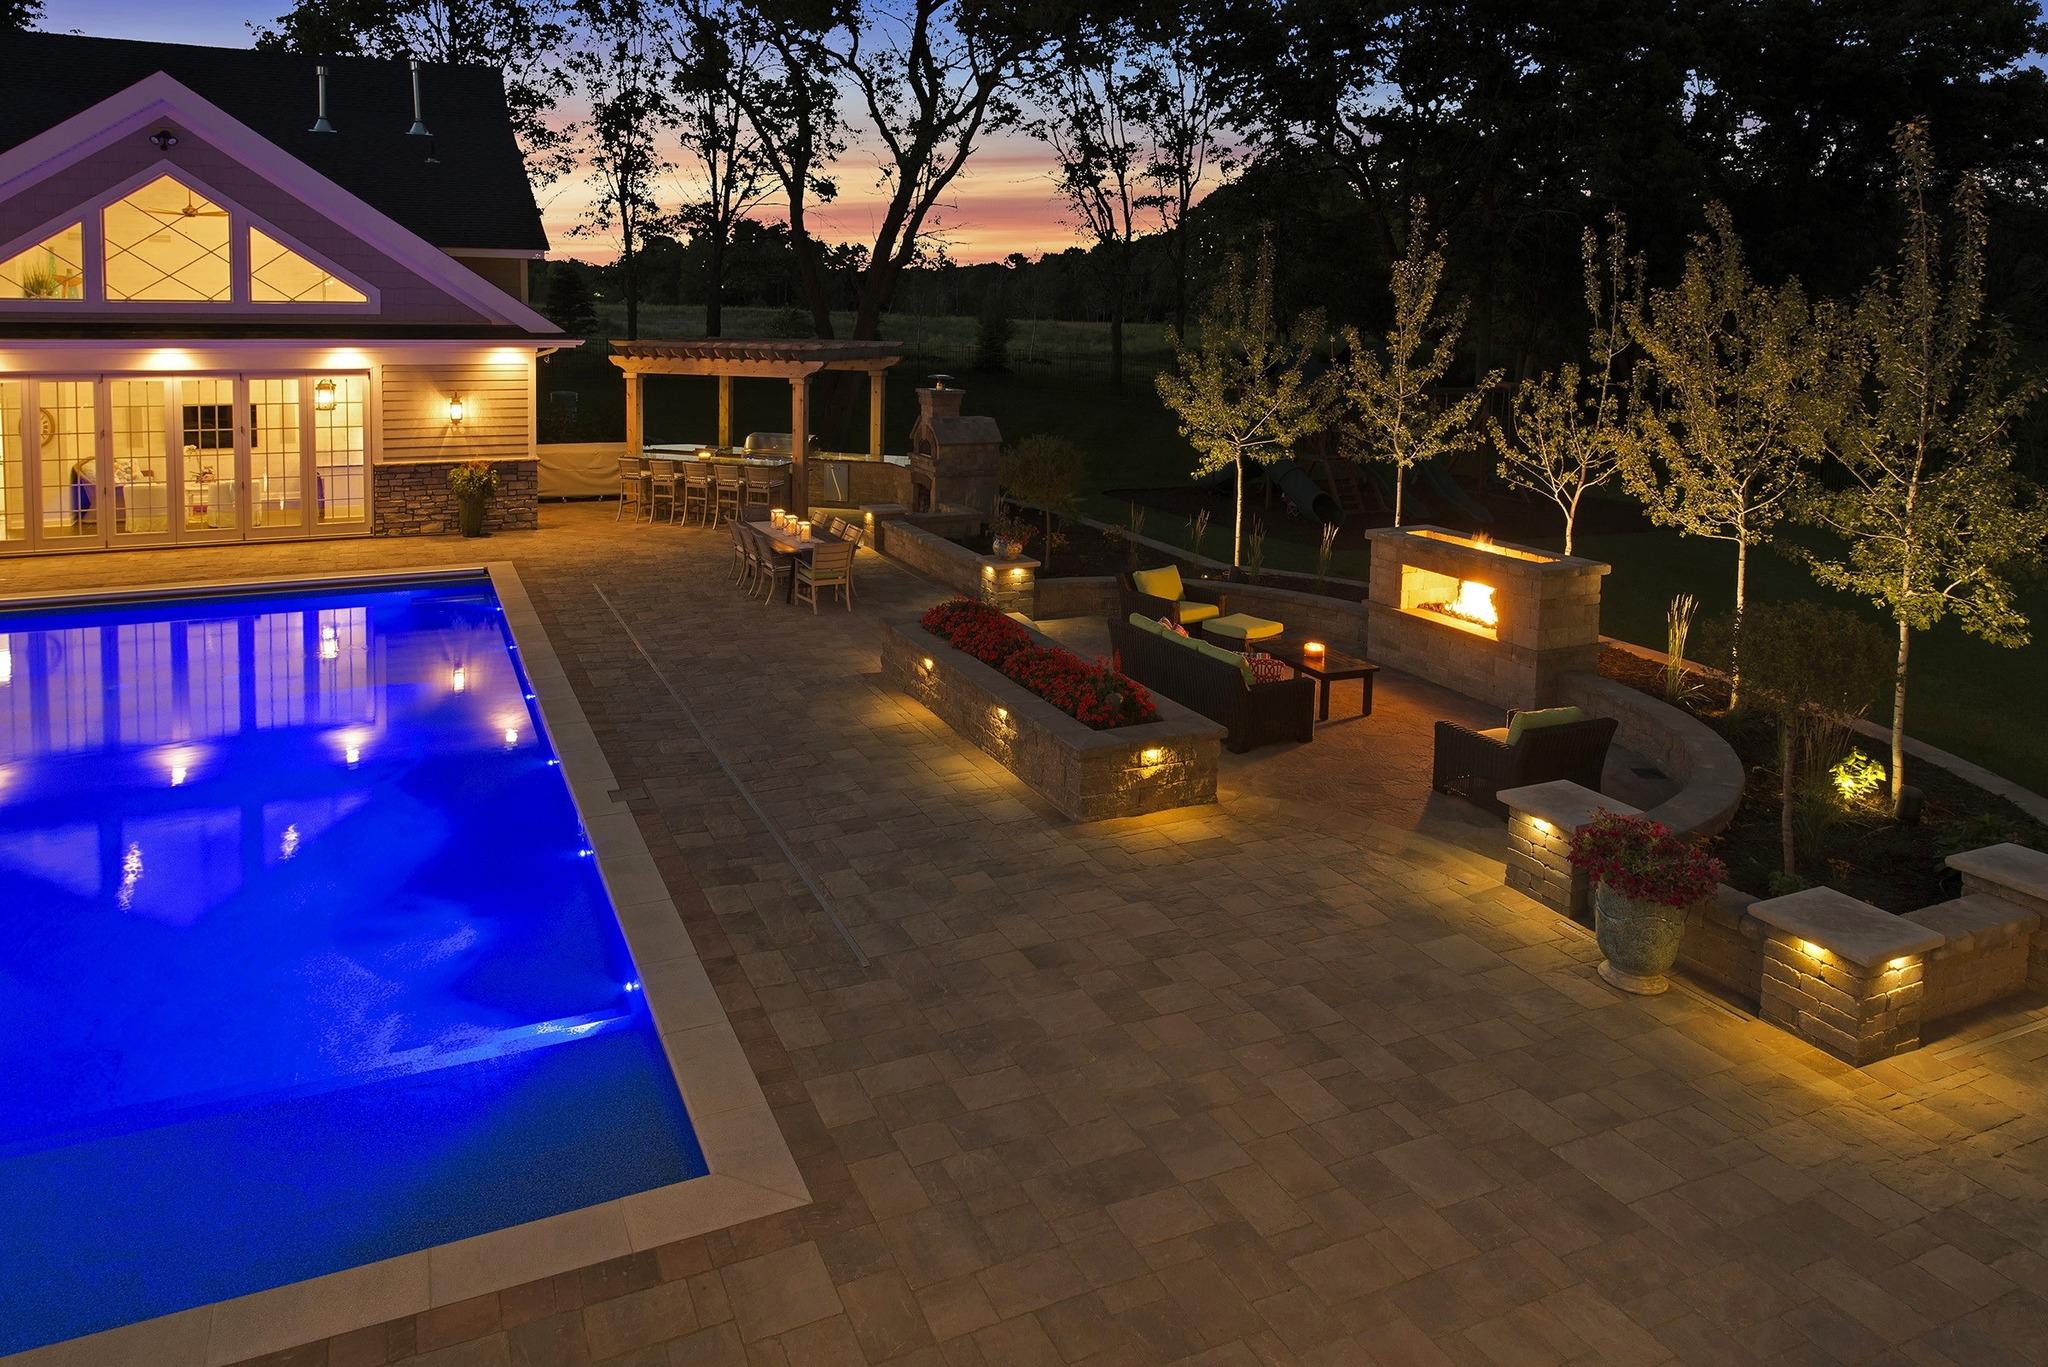 As the leaves begin to change and the temperature starts to drop, you might think that it's time to close up your pool for the season. But did you know that fall can actually be the perfect time to enjoy your pool? With cooler temperatures and fewer crowds, a fall swim can be an invigorating and relaxing experience. So don't let the changing season stop you from enjoying your pool.